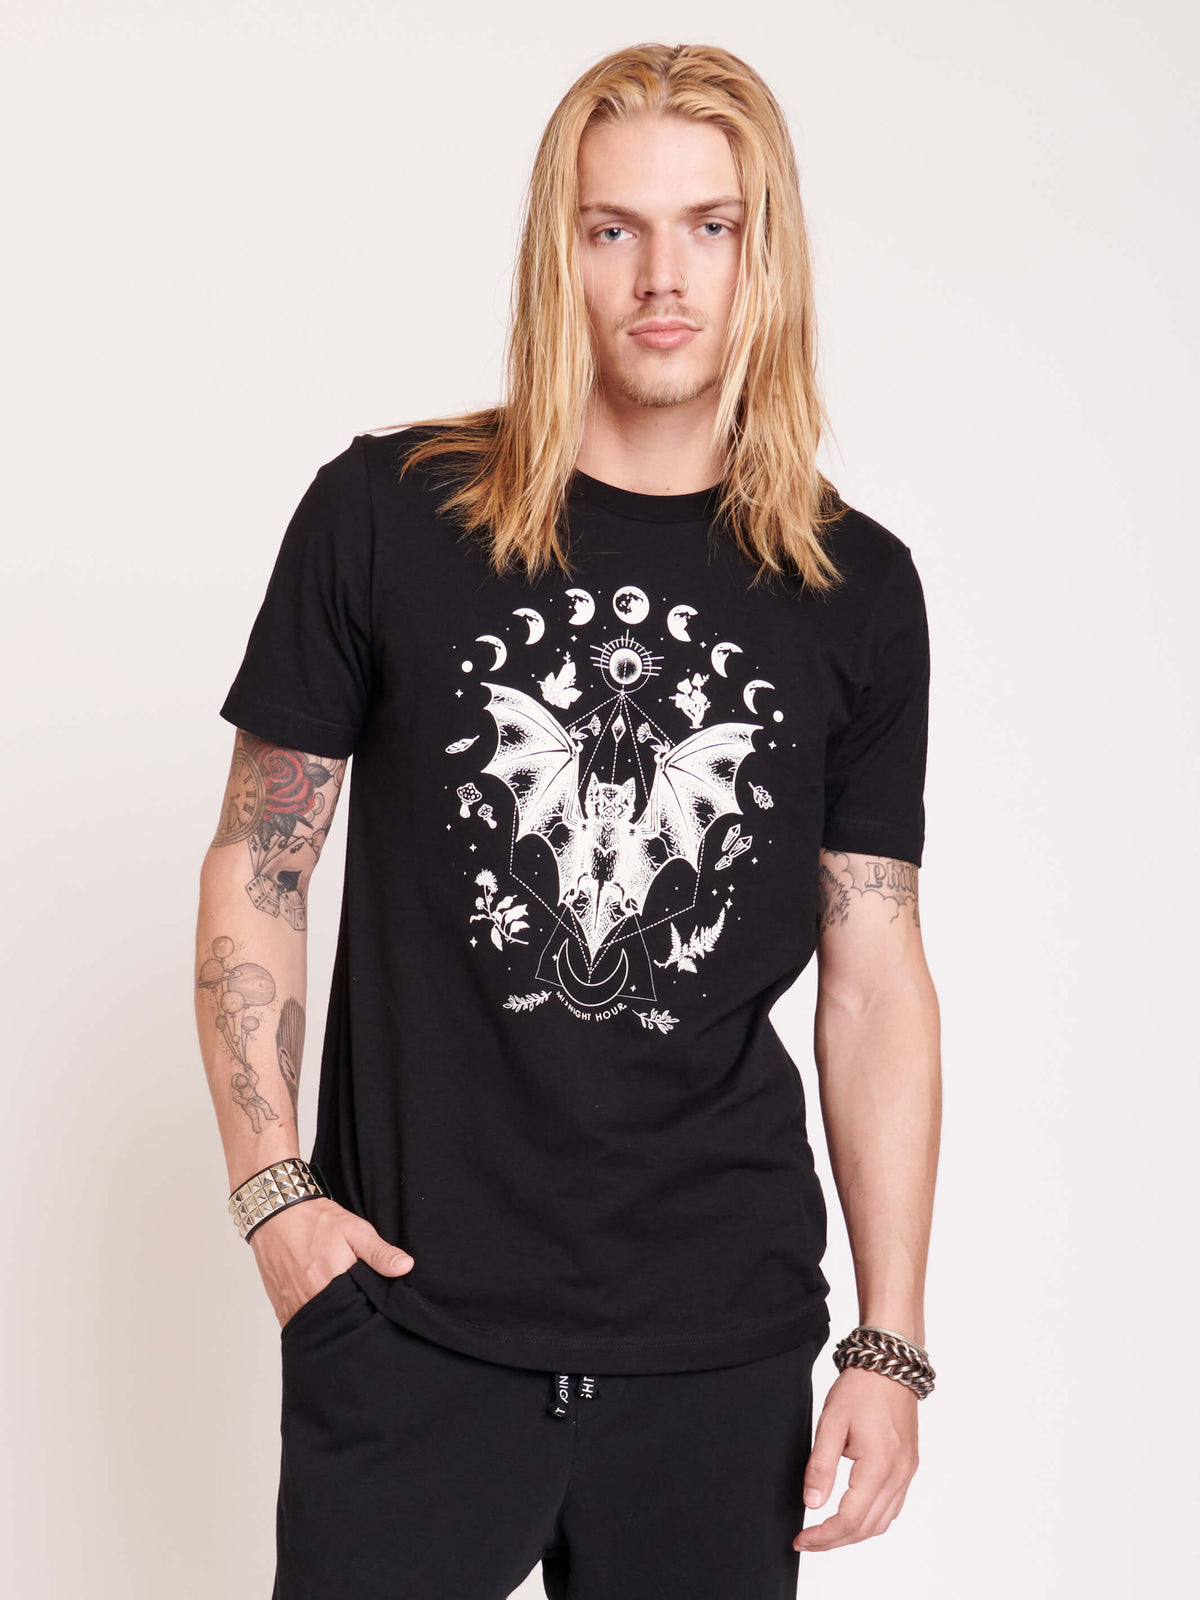 black gothic t-shirt with bat and moon phase